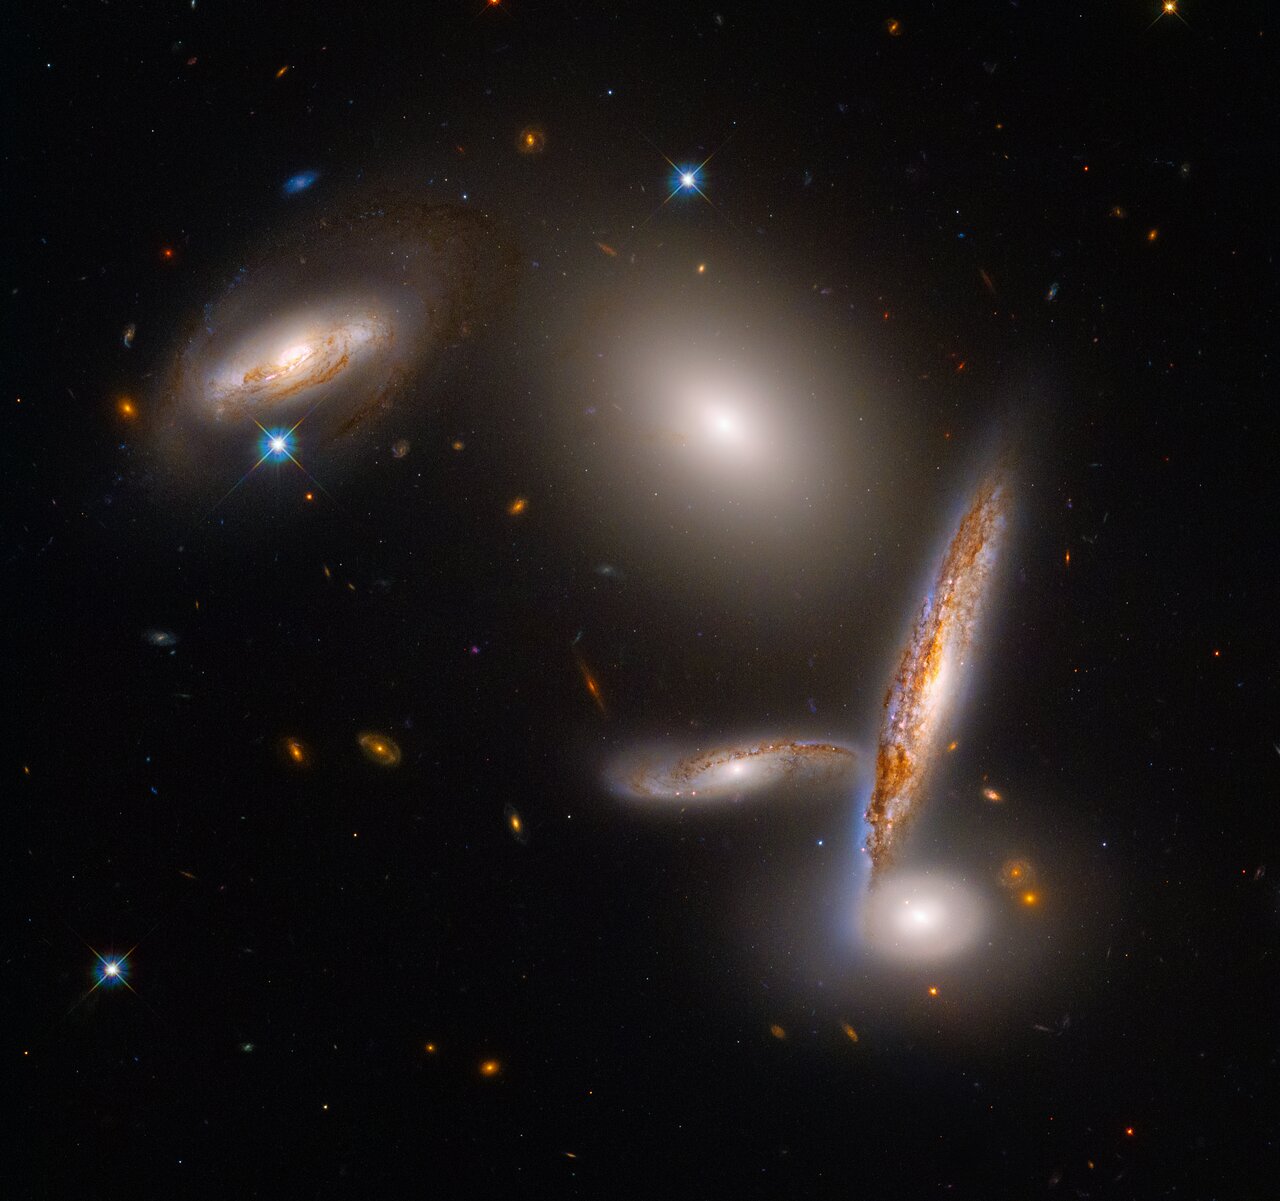 Five galaxies, two toward the upper right and top center, three clustered together in the lower right.